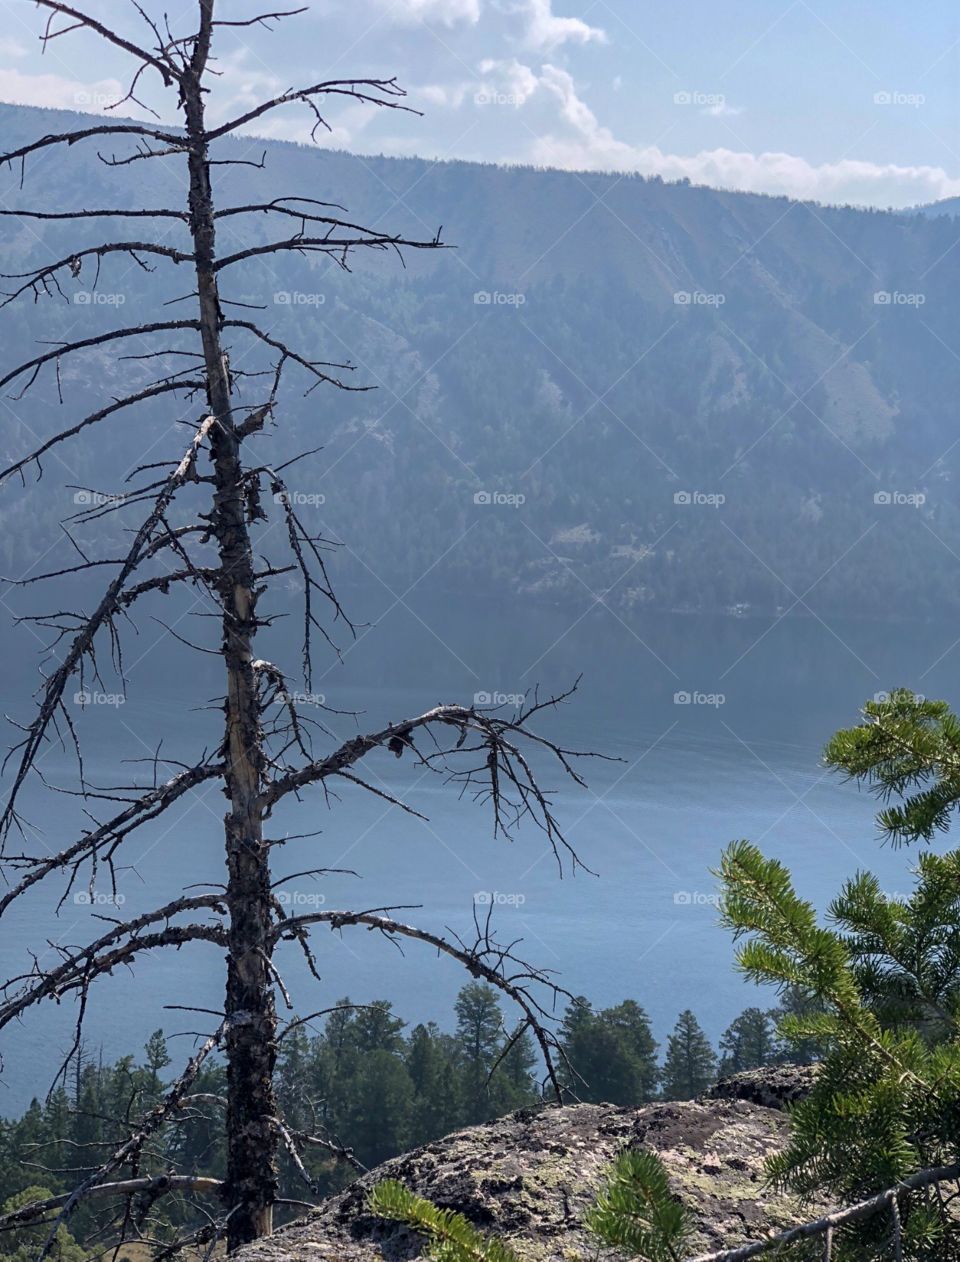 Charlie Brown tree on the top of a mountain overlooking Fremont lake.